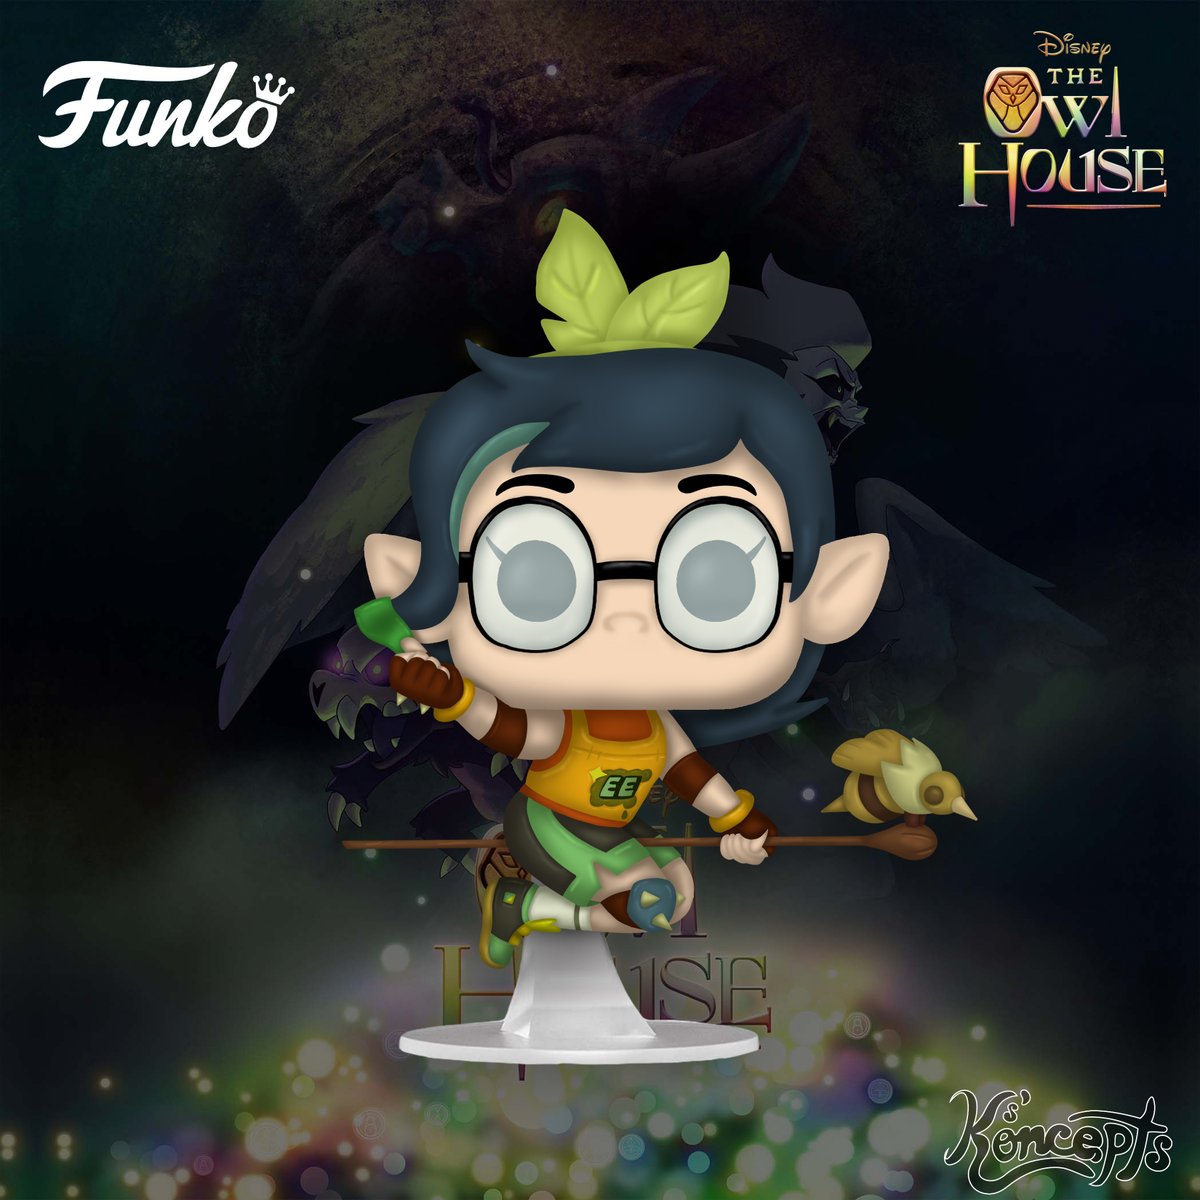 #533 Funko Pop! Box & Pop Concept: Willow (Emerald Entrail) (Timeskip) (The Owl House)

#TheOwlHouse #owlhouse #danaterrace #willow #willowpark #tatigabrielle #emeraldentrails #clover #watchinganddreaming #disney #funkopopconcept #ksfunkoconcepts